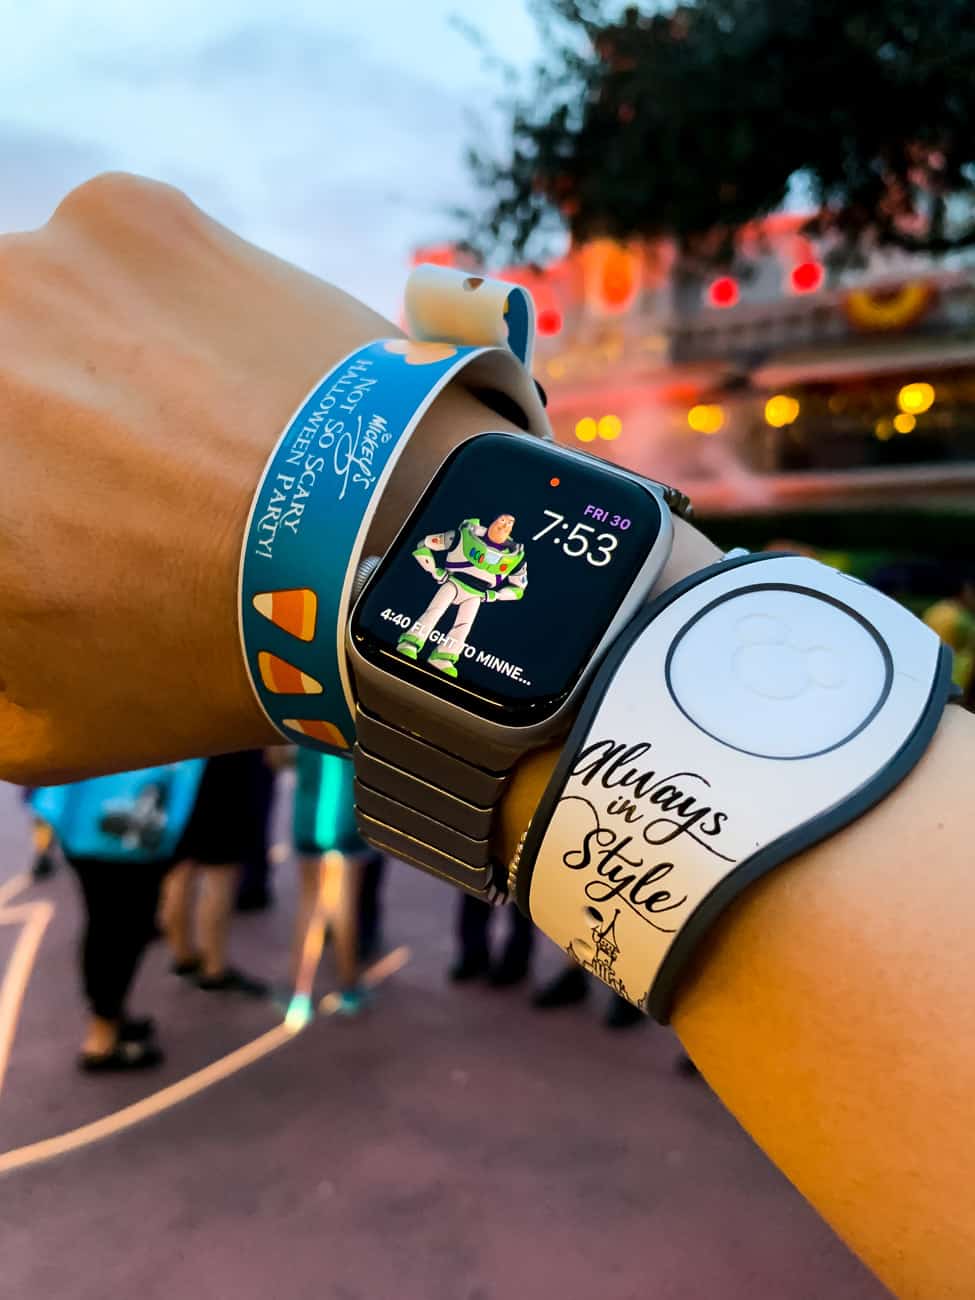 Mickey's Not So Scary Halloween Party wristband